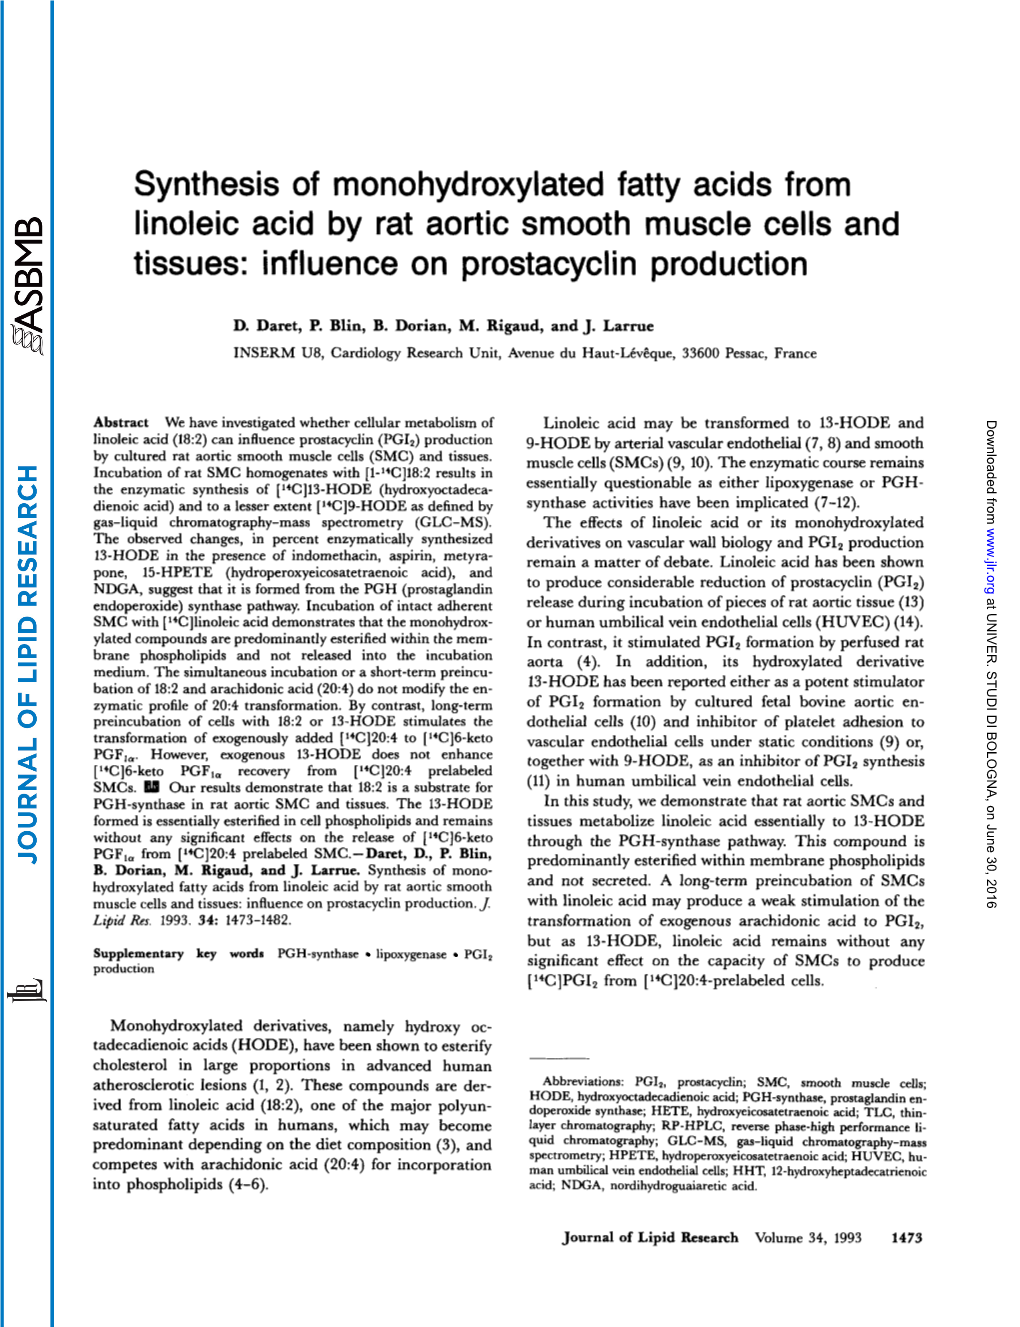 Synthesis of Monohydroxylated Fatty Acids from Linoleic Acid by Rat Aortic Smooth Muscle Cells and Tissues: Influence on Prostacyclin Production